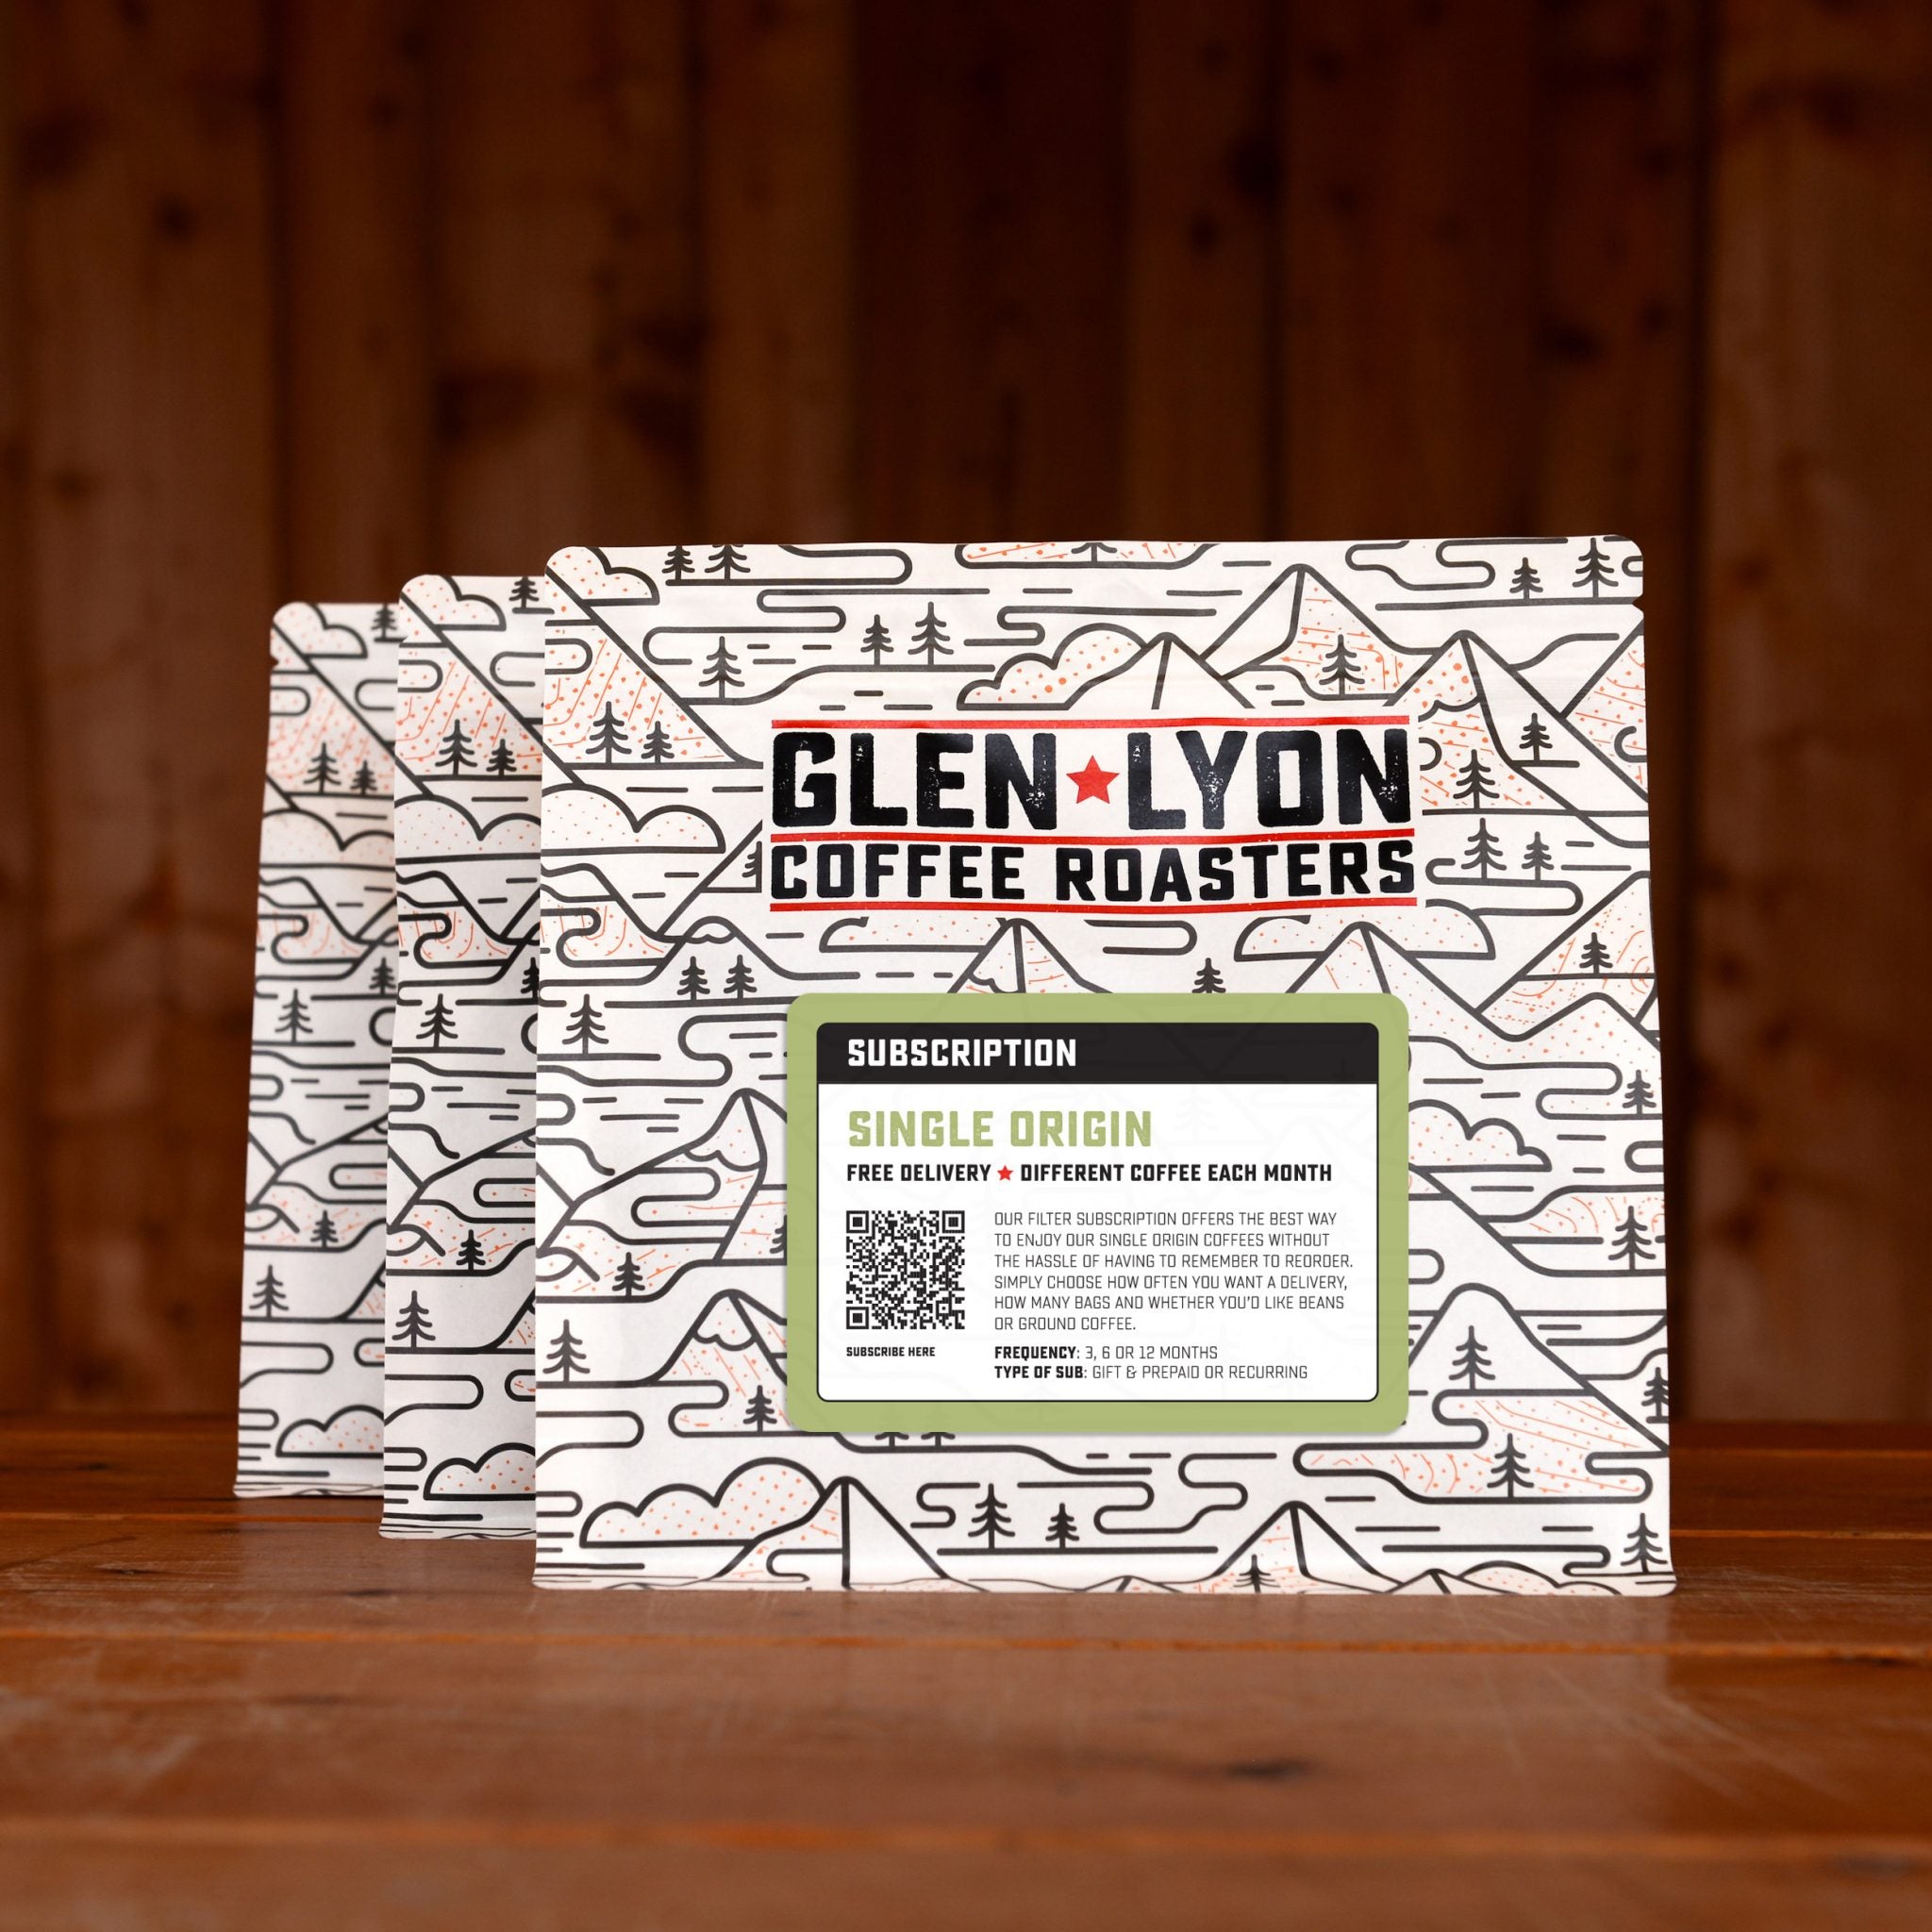 3 bags of Single Origin subscription labelled speciality coffee from Glen Lyon Coffee Roasters sitting on a wooden table